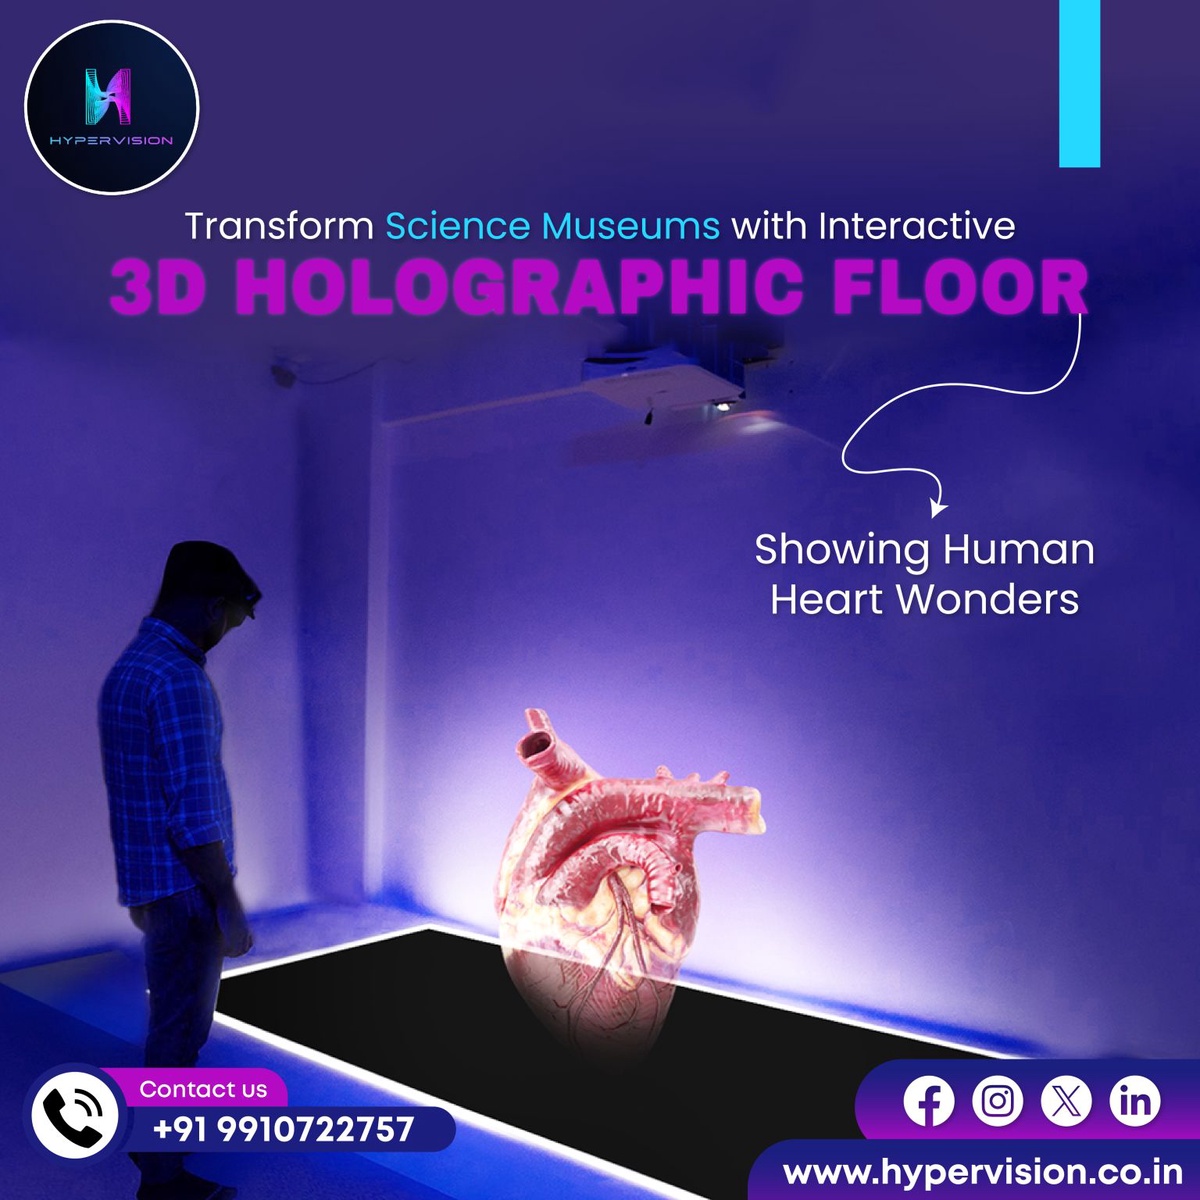 Transform Science Museums with Interactive 3D HOLOGRAPHIC FLOOR